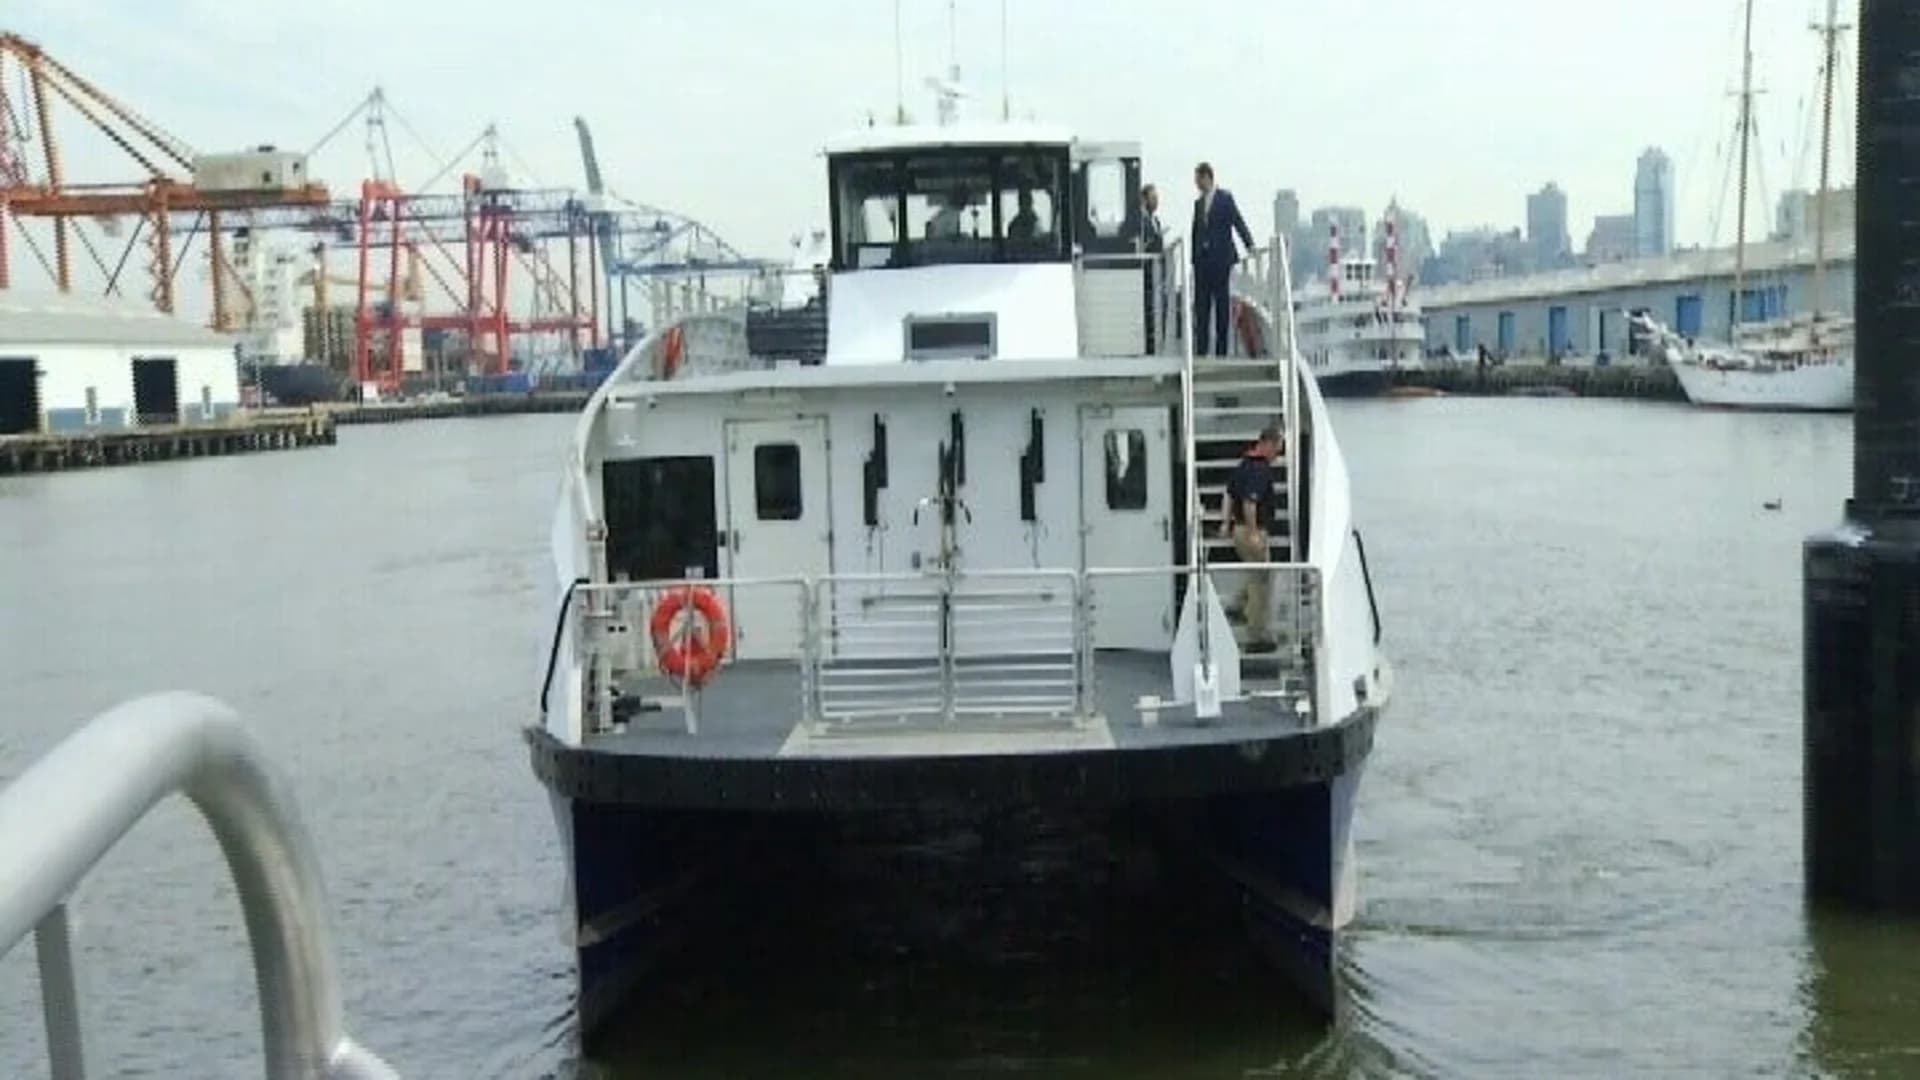 NYC Ferry’s South Brooklyn route begins